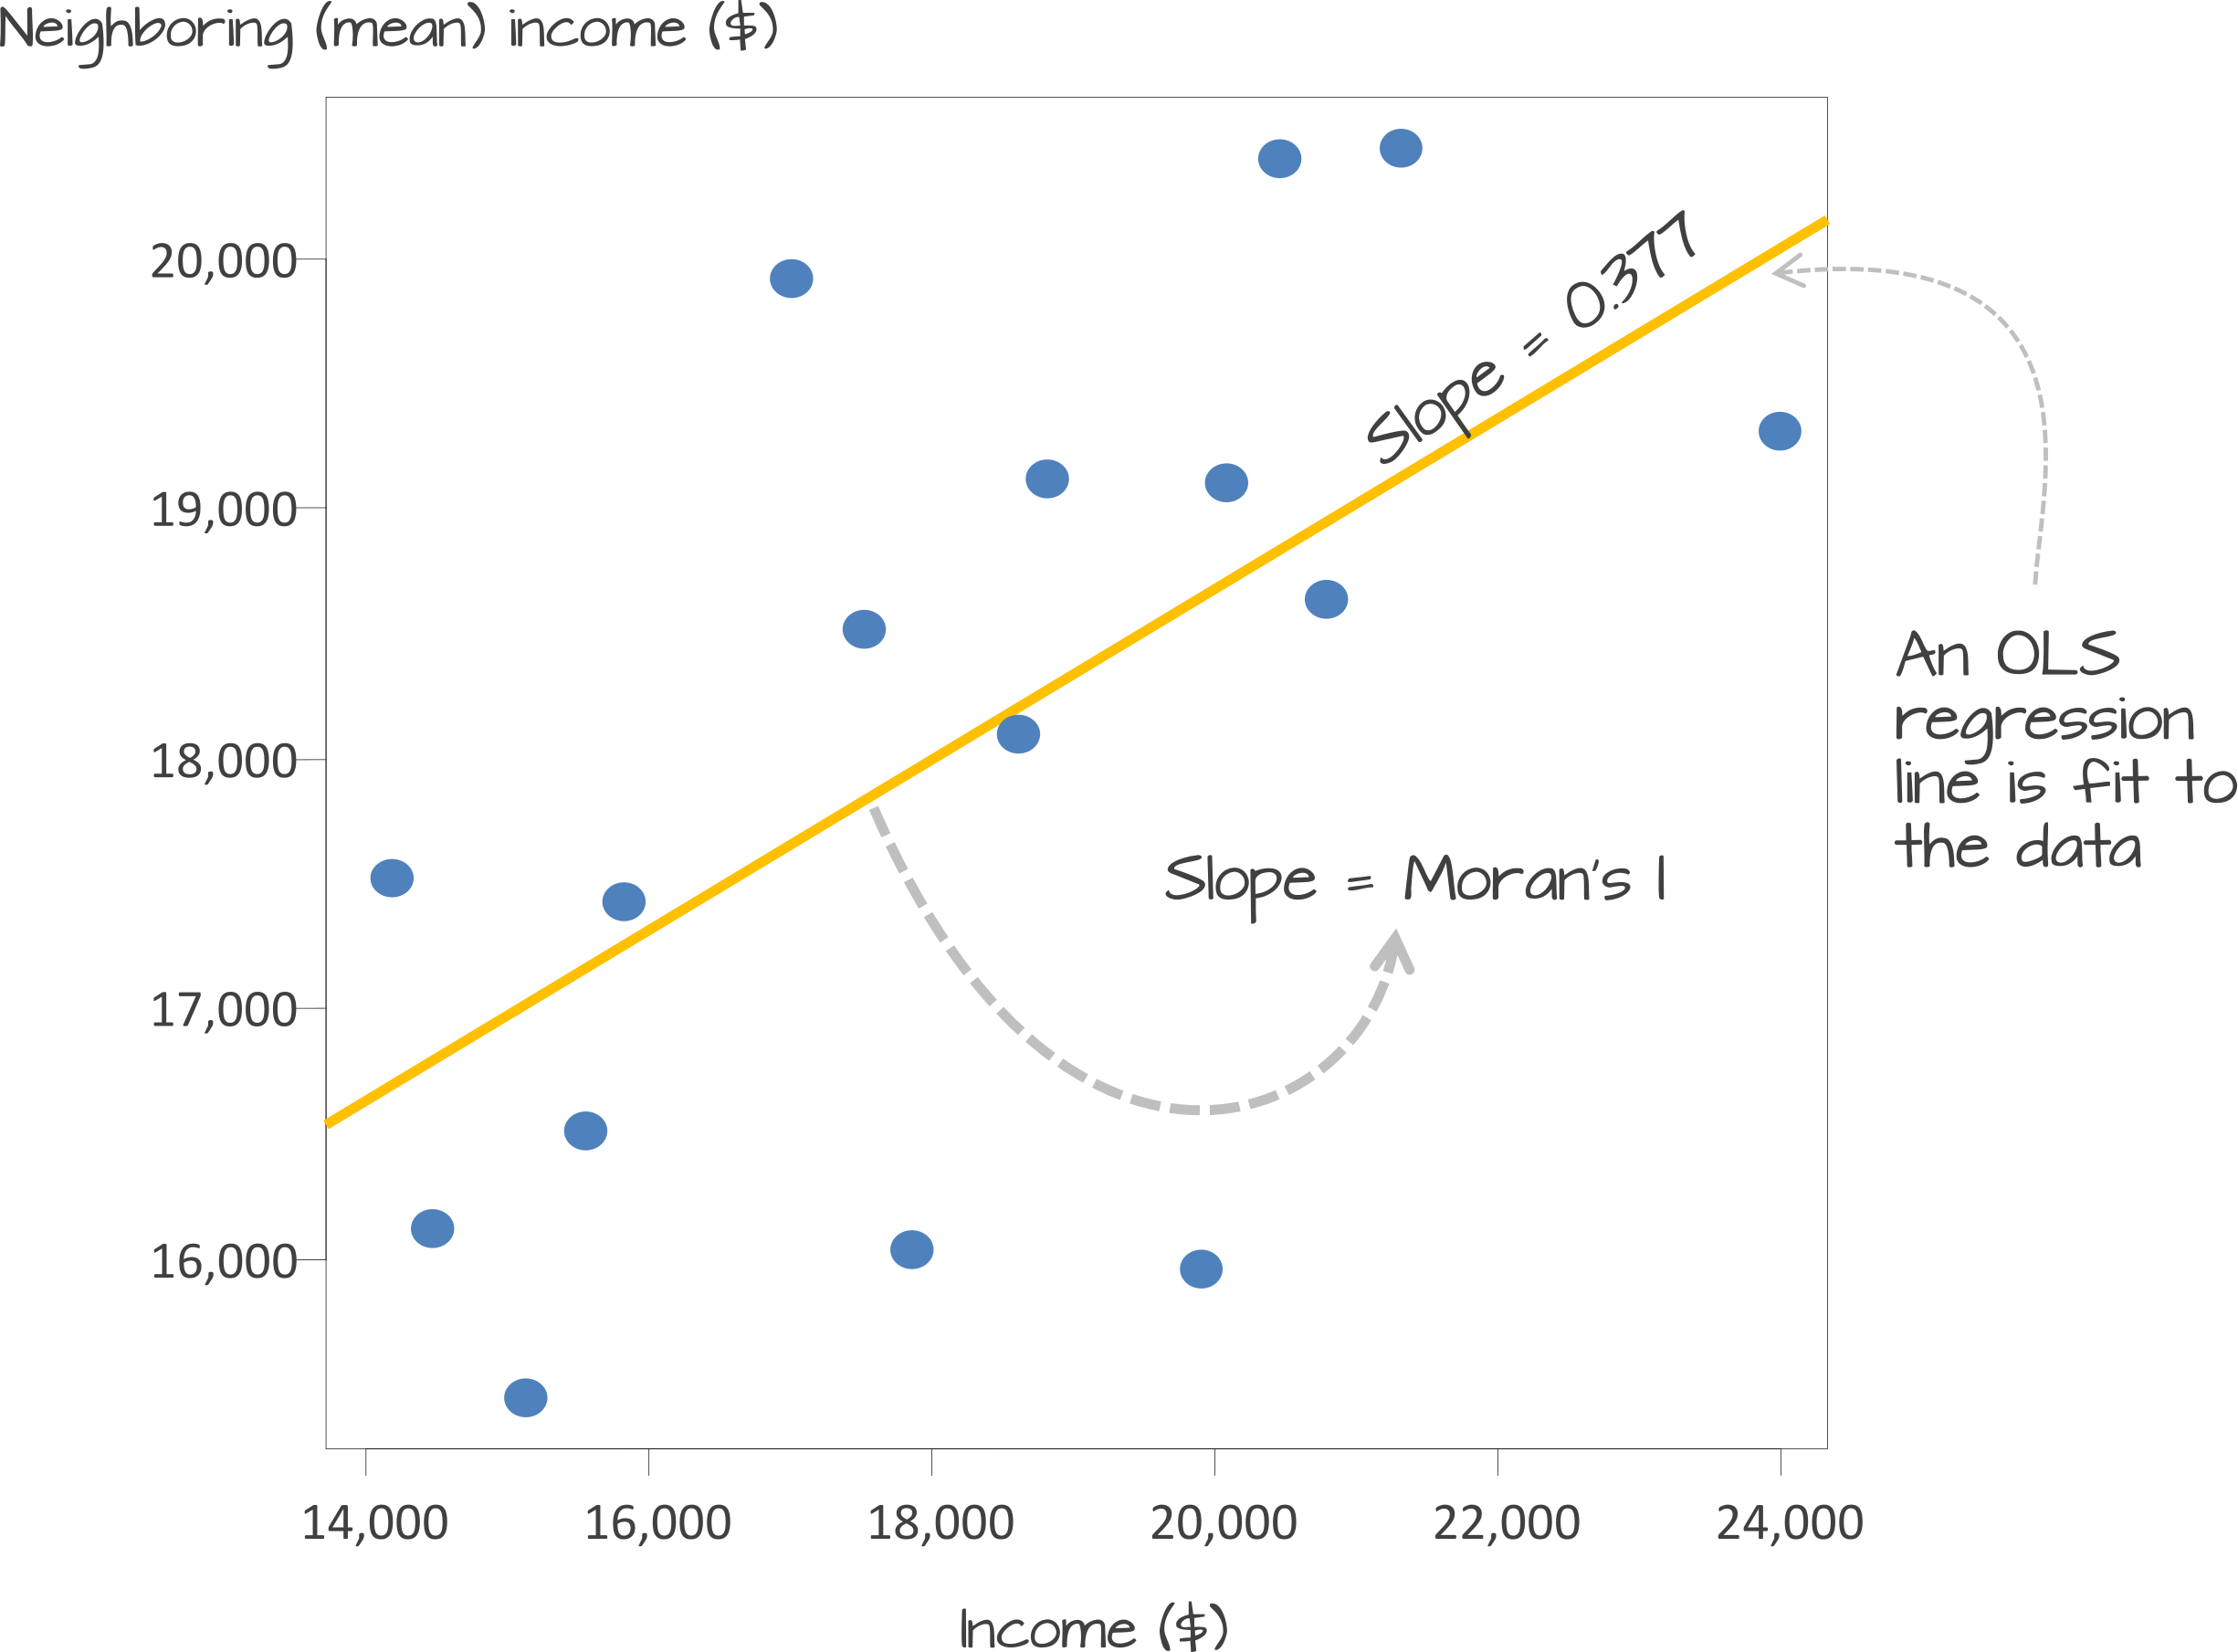 Scatter plot of *Income~lag~* vs. *Income*. If we equalize the spread between both axes (i.e. convert to a z-score) the slope of the regression line represents the Moran's I statistic.